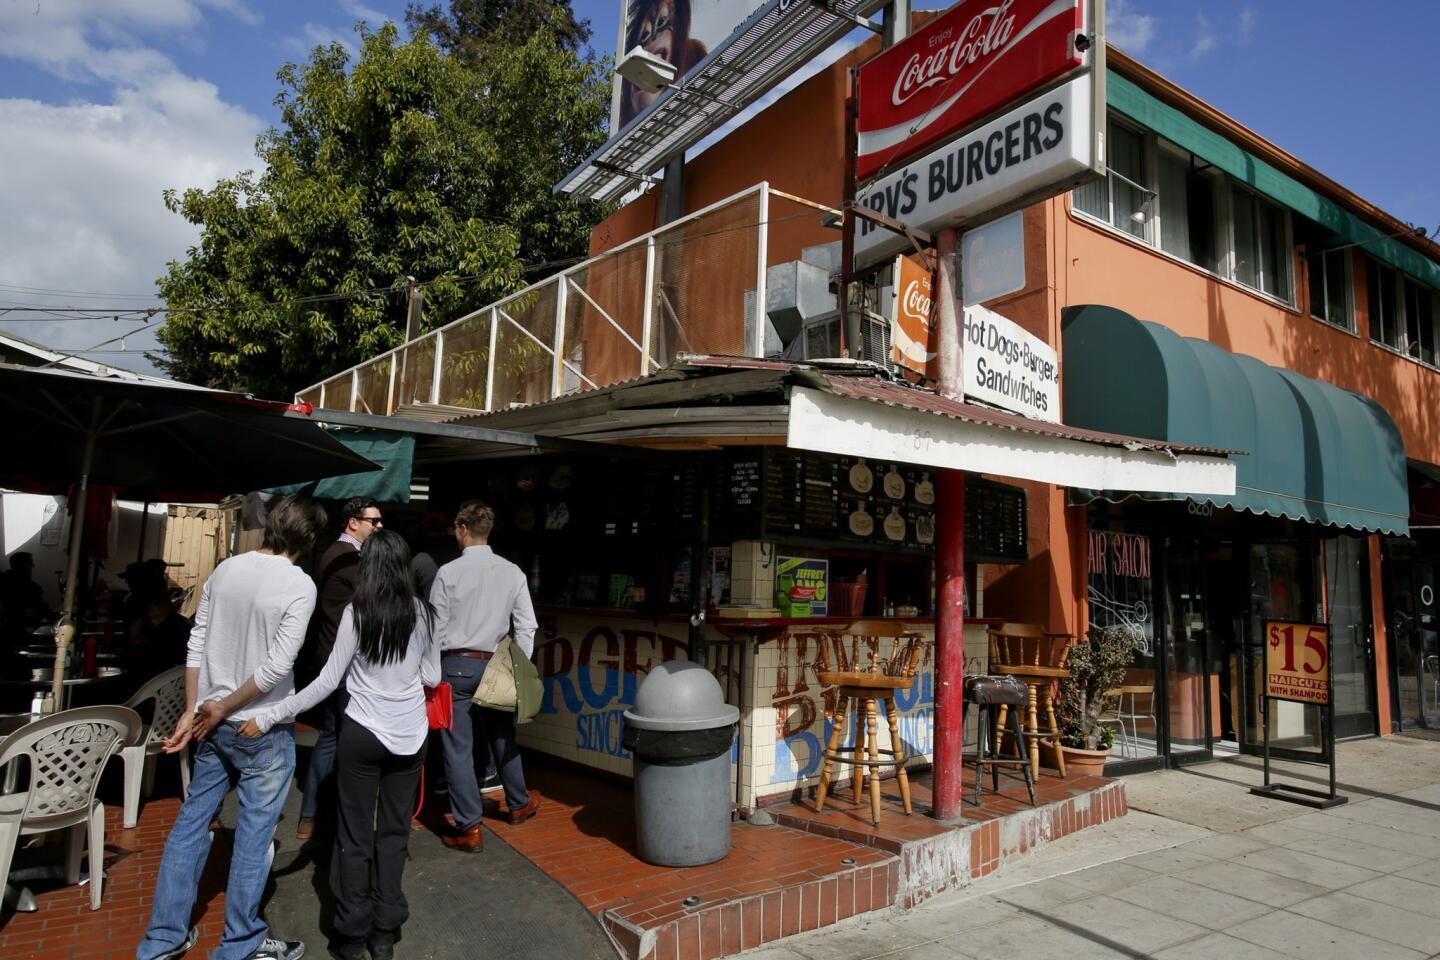 Irv's Burgers in West Hollywood is set to close Thursday after dishing out hamburgers and fries for 63 years.